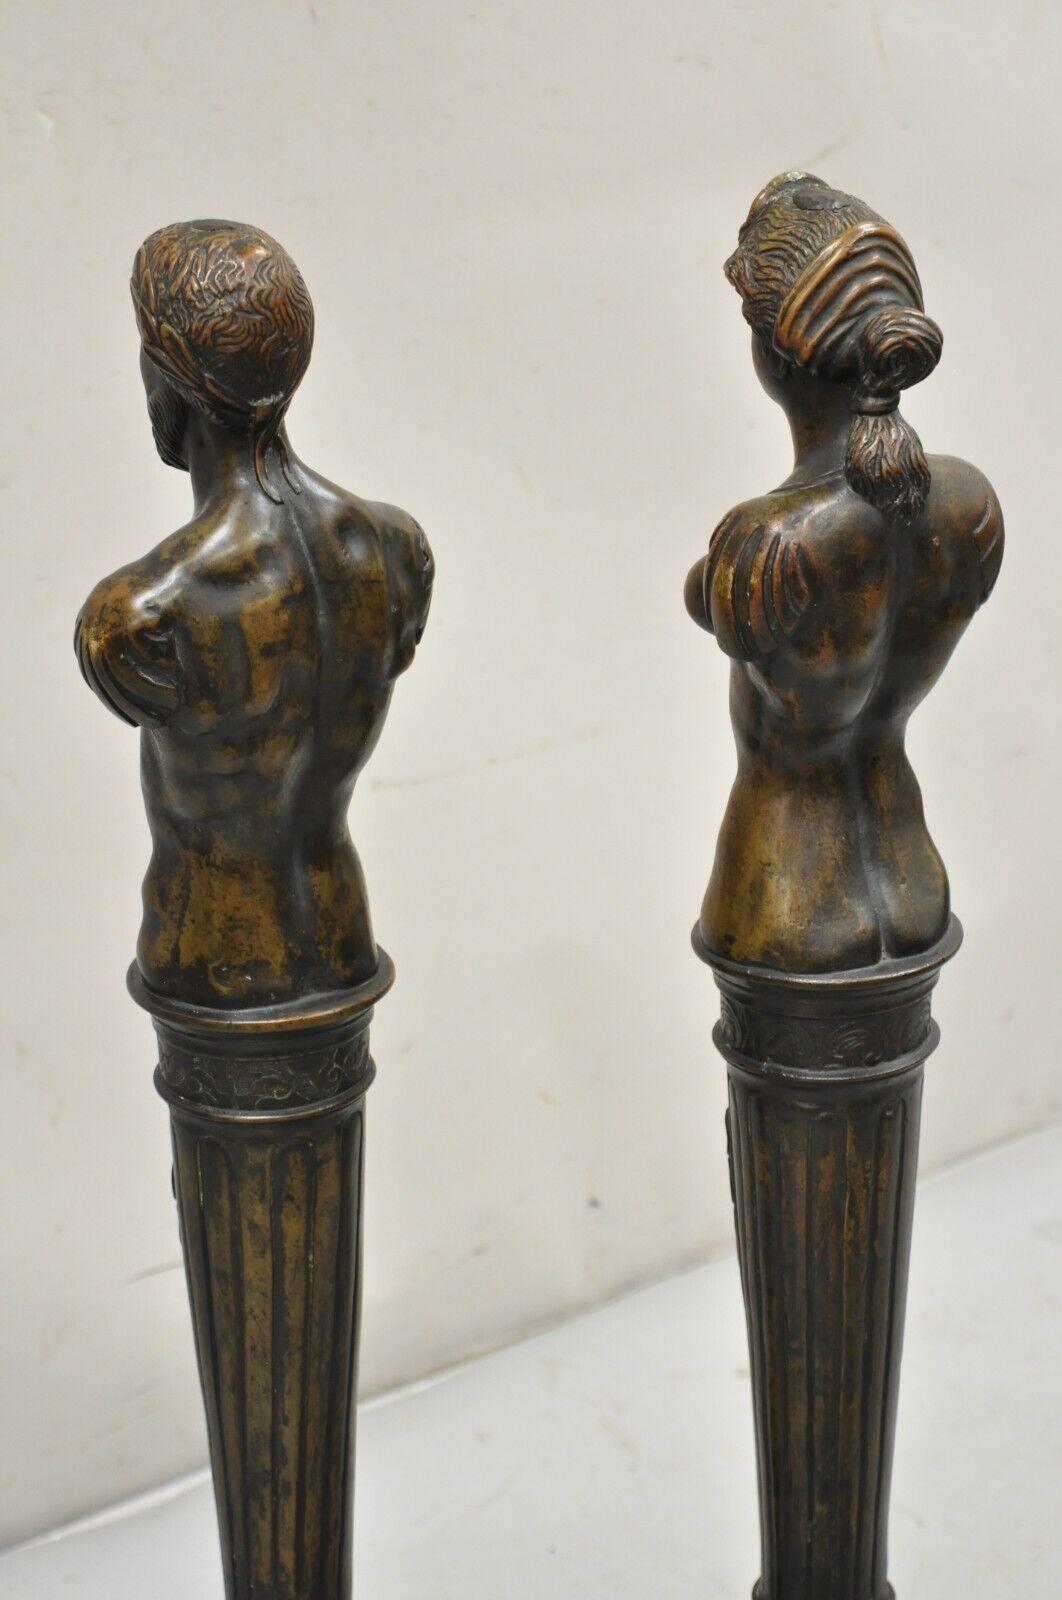 Antique French Renaissance Revival Large Figural Man and Woman Andirons - a Pair For Sale 4